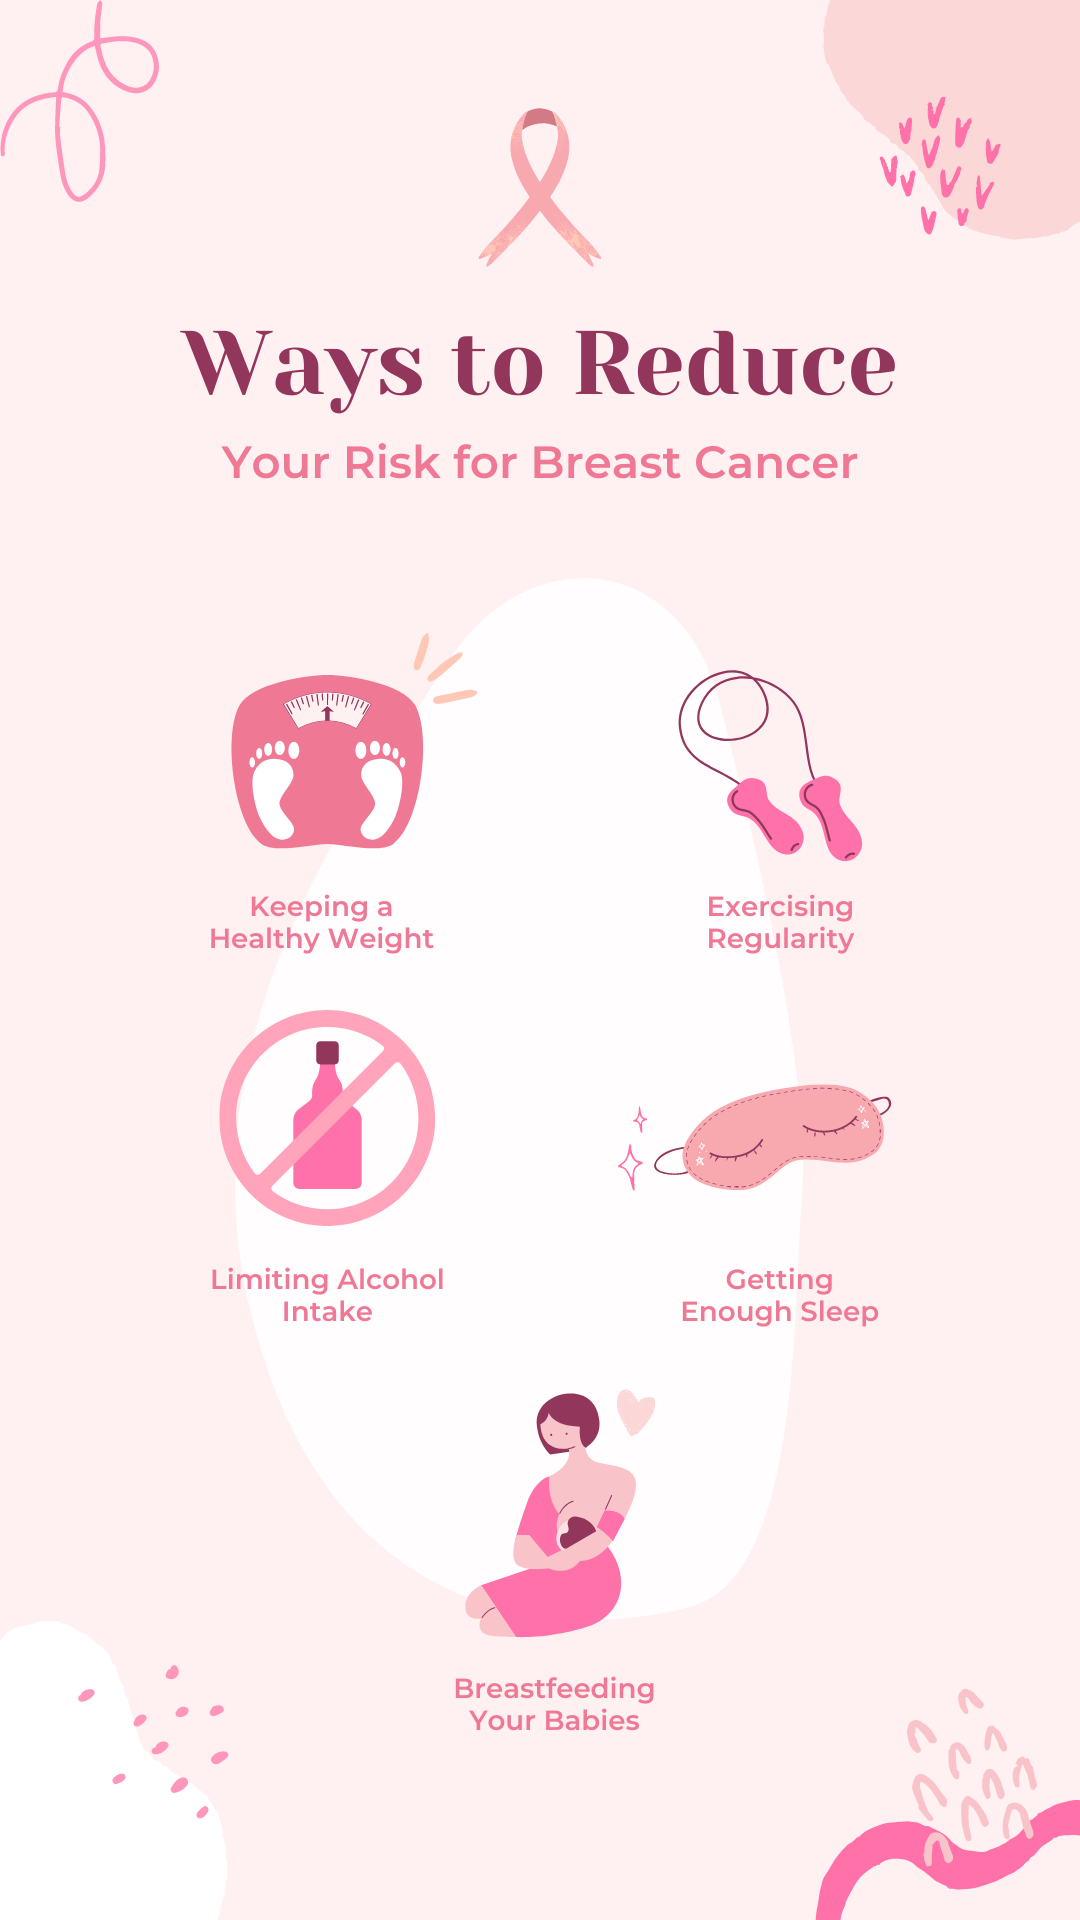 Ways to Reduce Your Risk for Breast Cancer